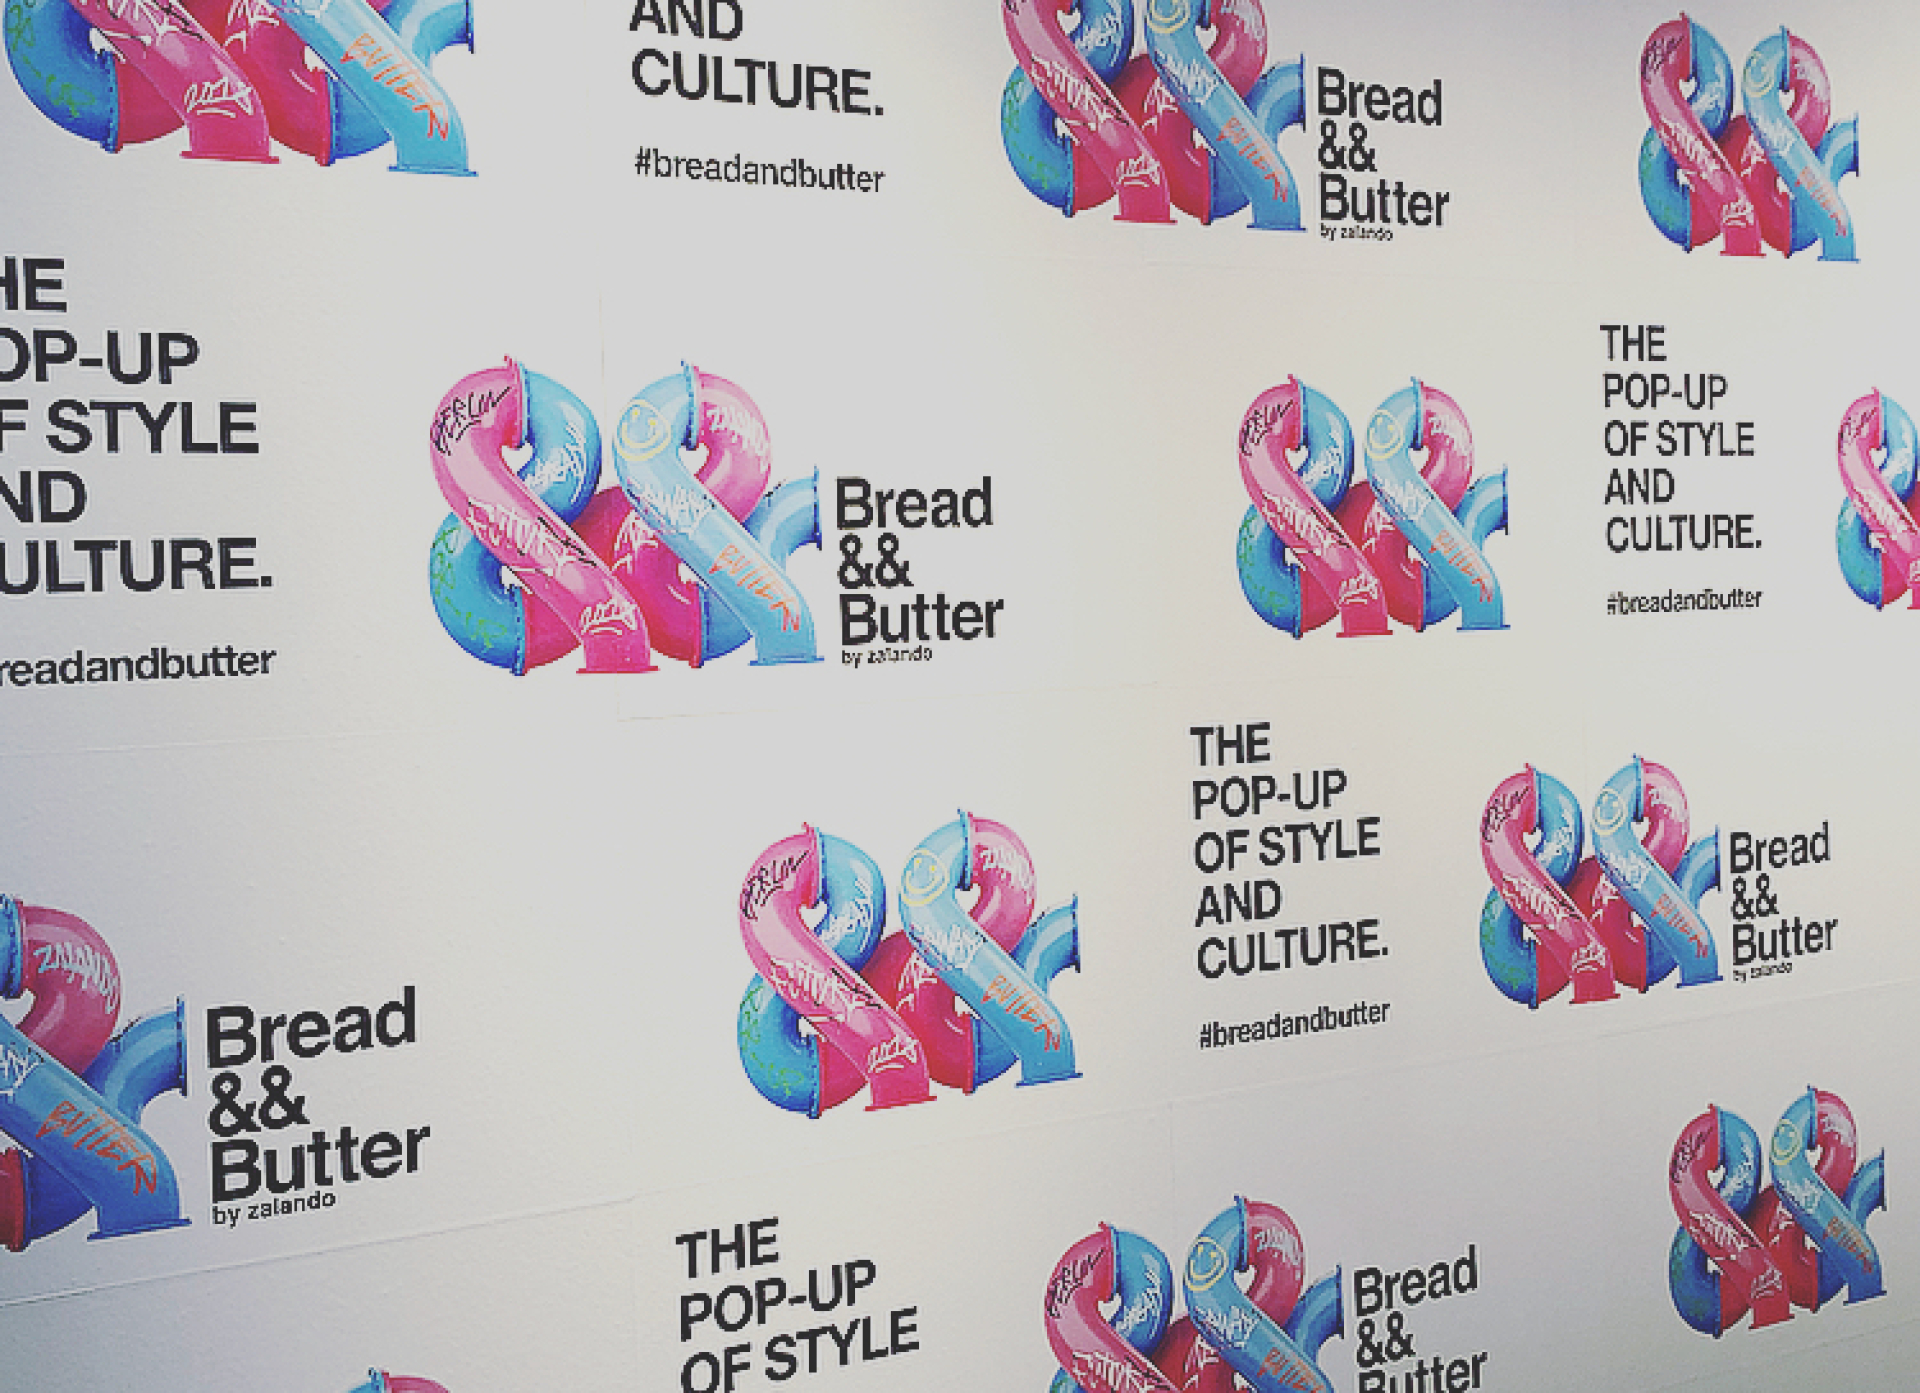 Pop culture, street styles and young labels – this was Bread && Butter by Zalando 2018